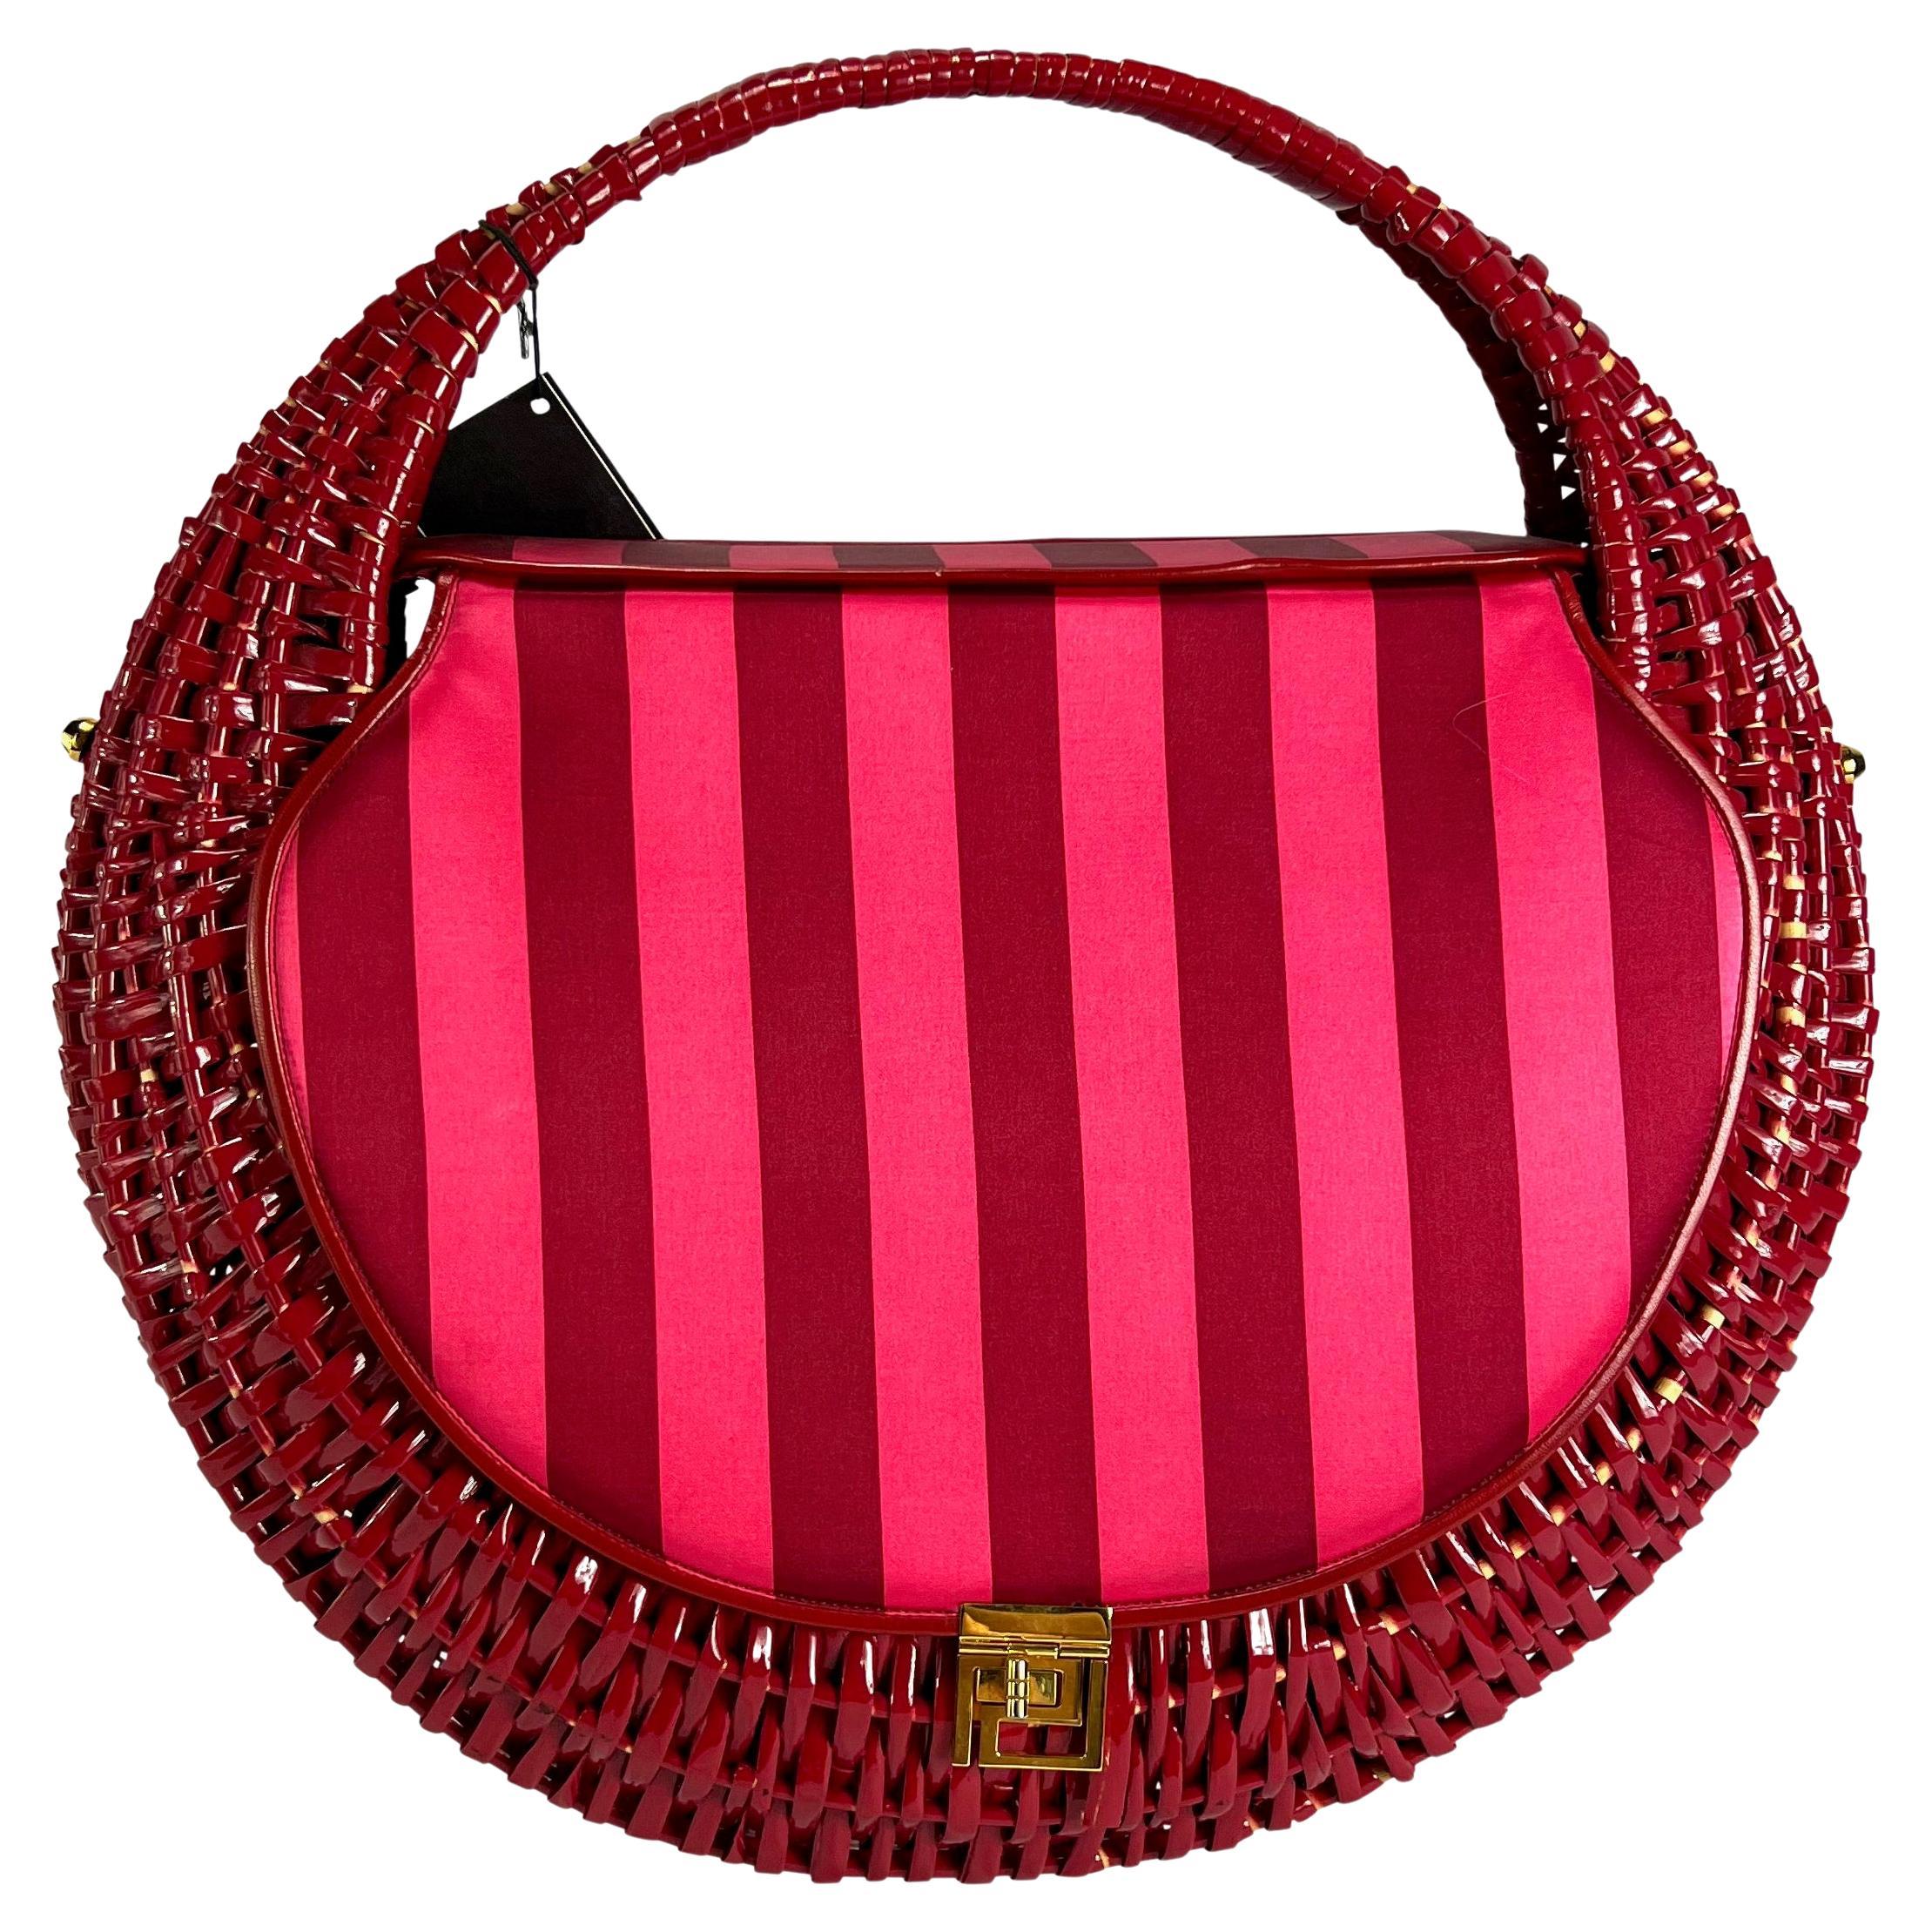 NWT S/S 2001 Atelier Versace by Donatella Versace Pink Satin and Wicker Bag